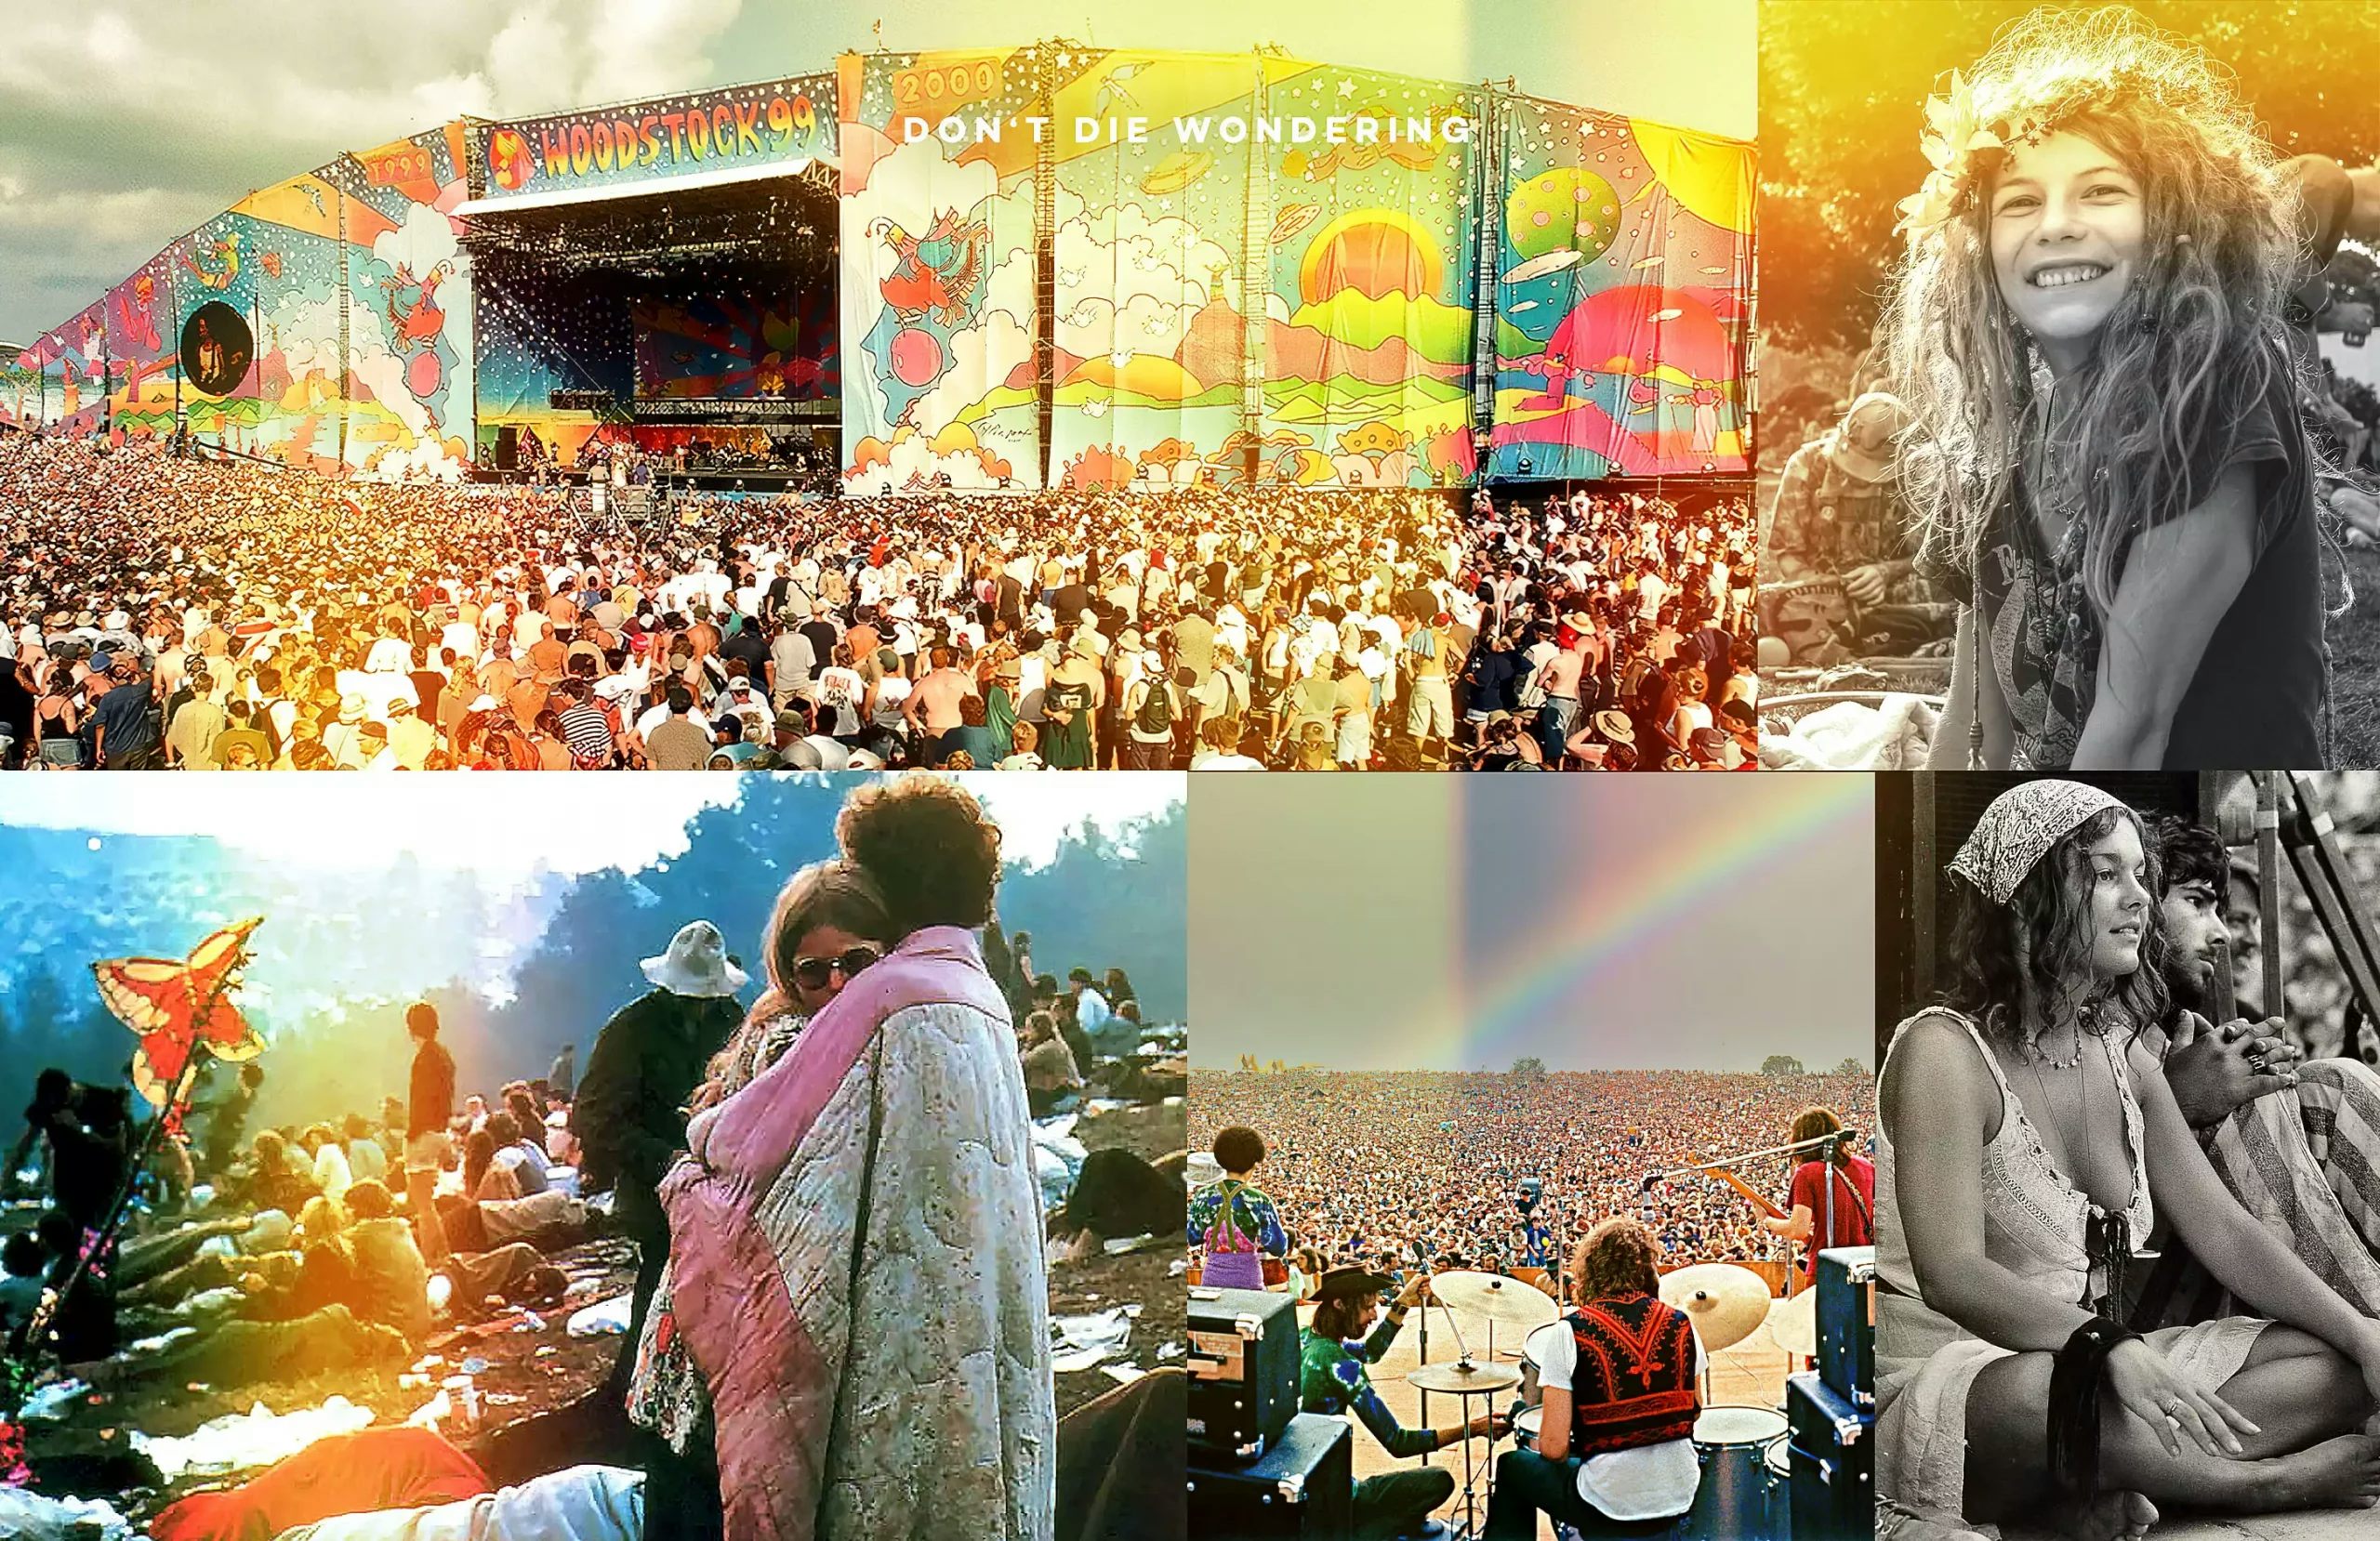 Why Woodstock Has Been Written Into Music Folklore